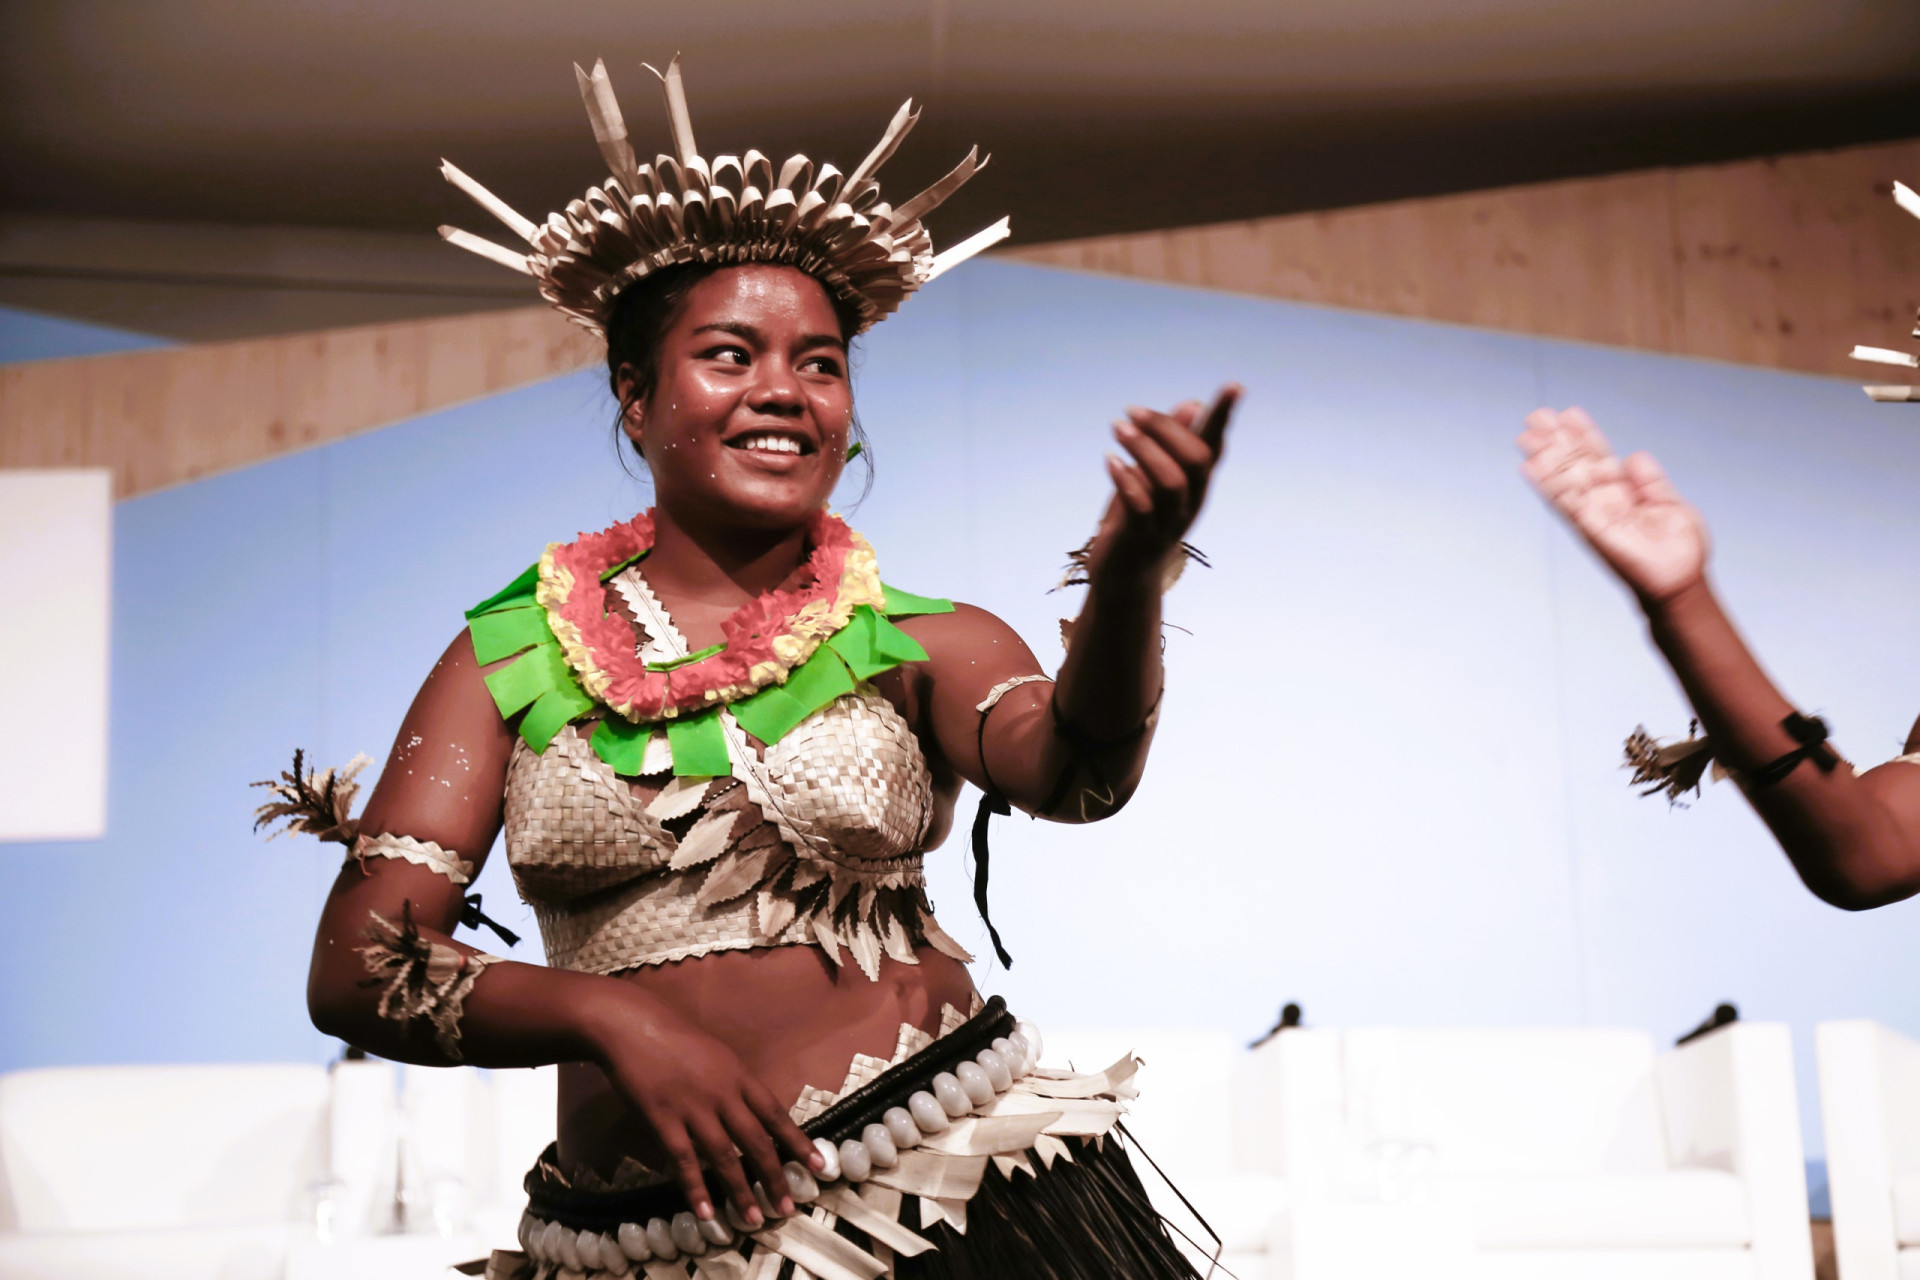 <p>Kiribati art includes intricate weaving, wood carving, and the creation of traditional clothing and accessories, which are often used in cultural ceremonies and daily life.</p><p>You may also like:<a href="https://www.starsinsider.com/n/198389?utm_source=msn.com&utm_medium=display&utm_campaign=referral_description&utm_content=717375en-us"> Eric Clapton: the life of a legendary musician</a></p>